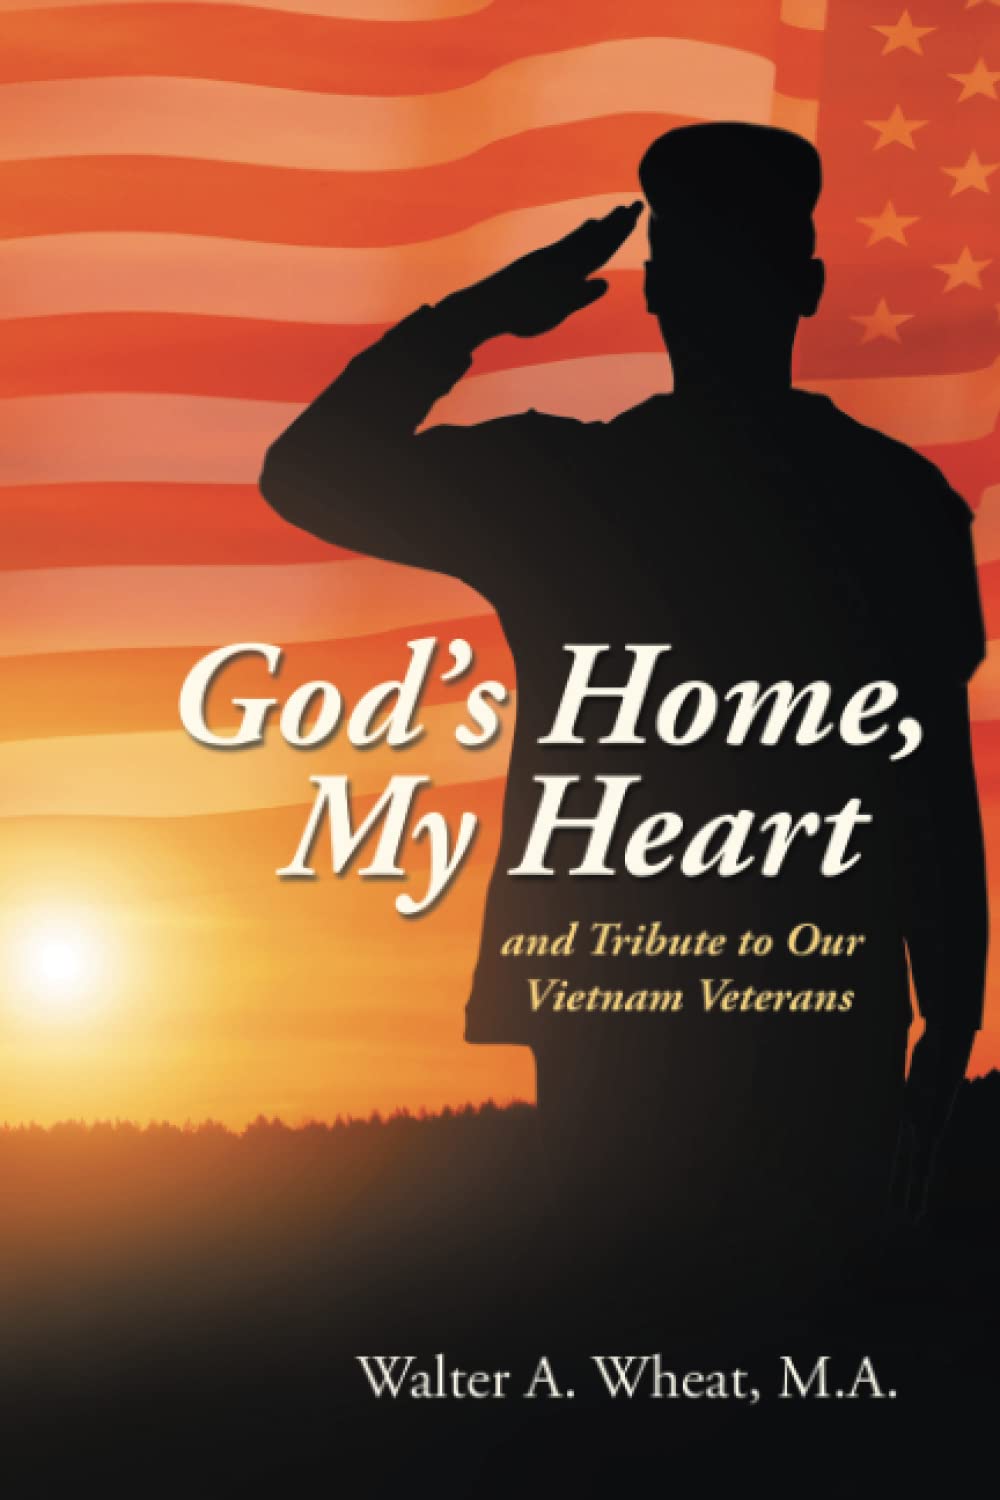 Walter A. Wheat promotes book, God’s Home, My Heart: and Tribute to Our Vietnam Veterans; supported by Author’s Tranquility Press 1